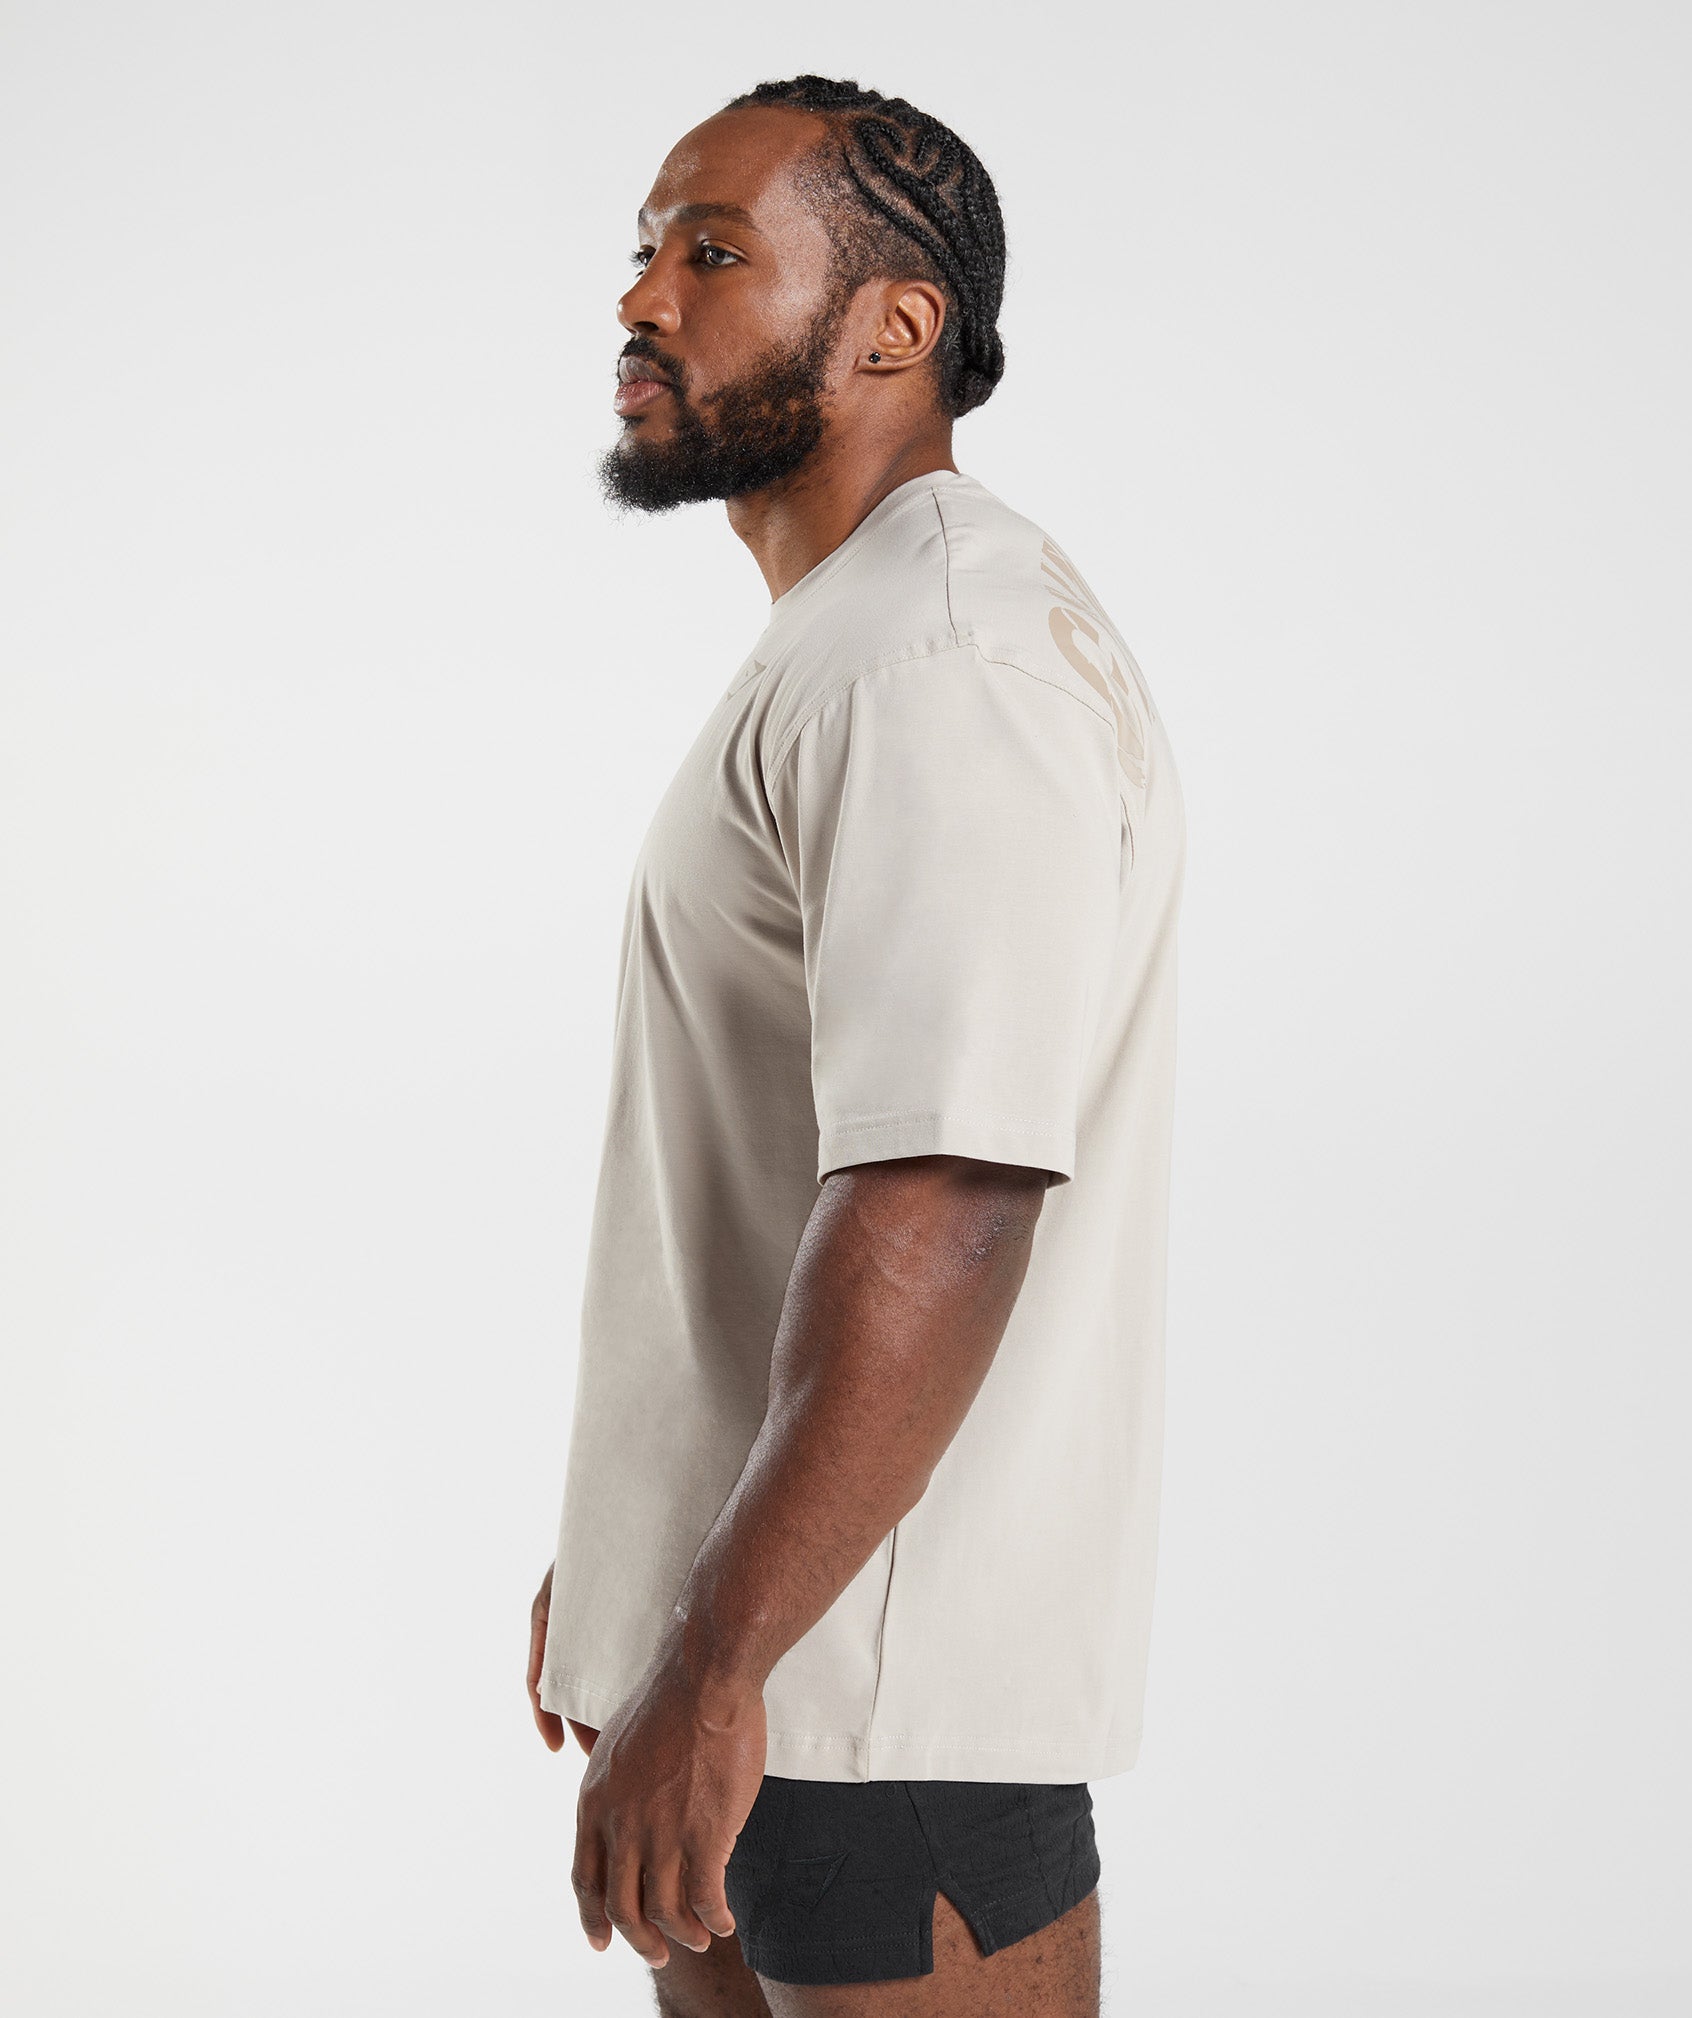 Power T-Shirt in Pebble Grey - view 3